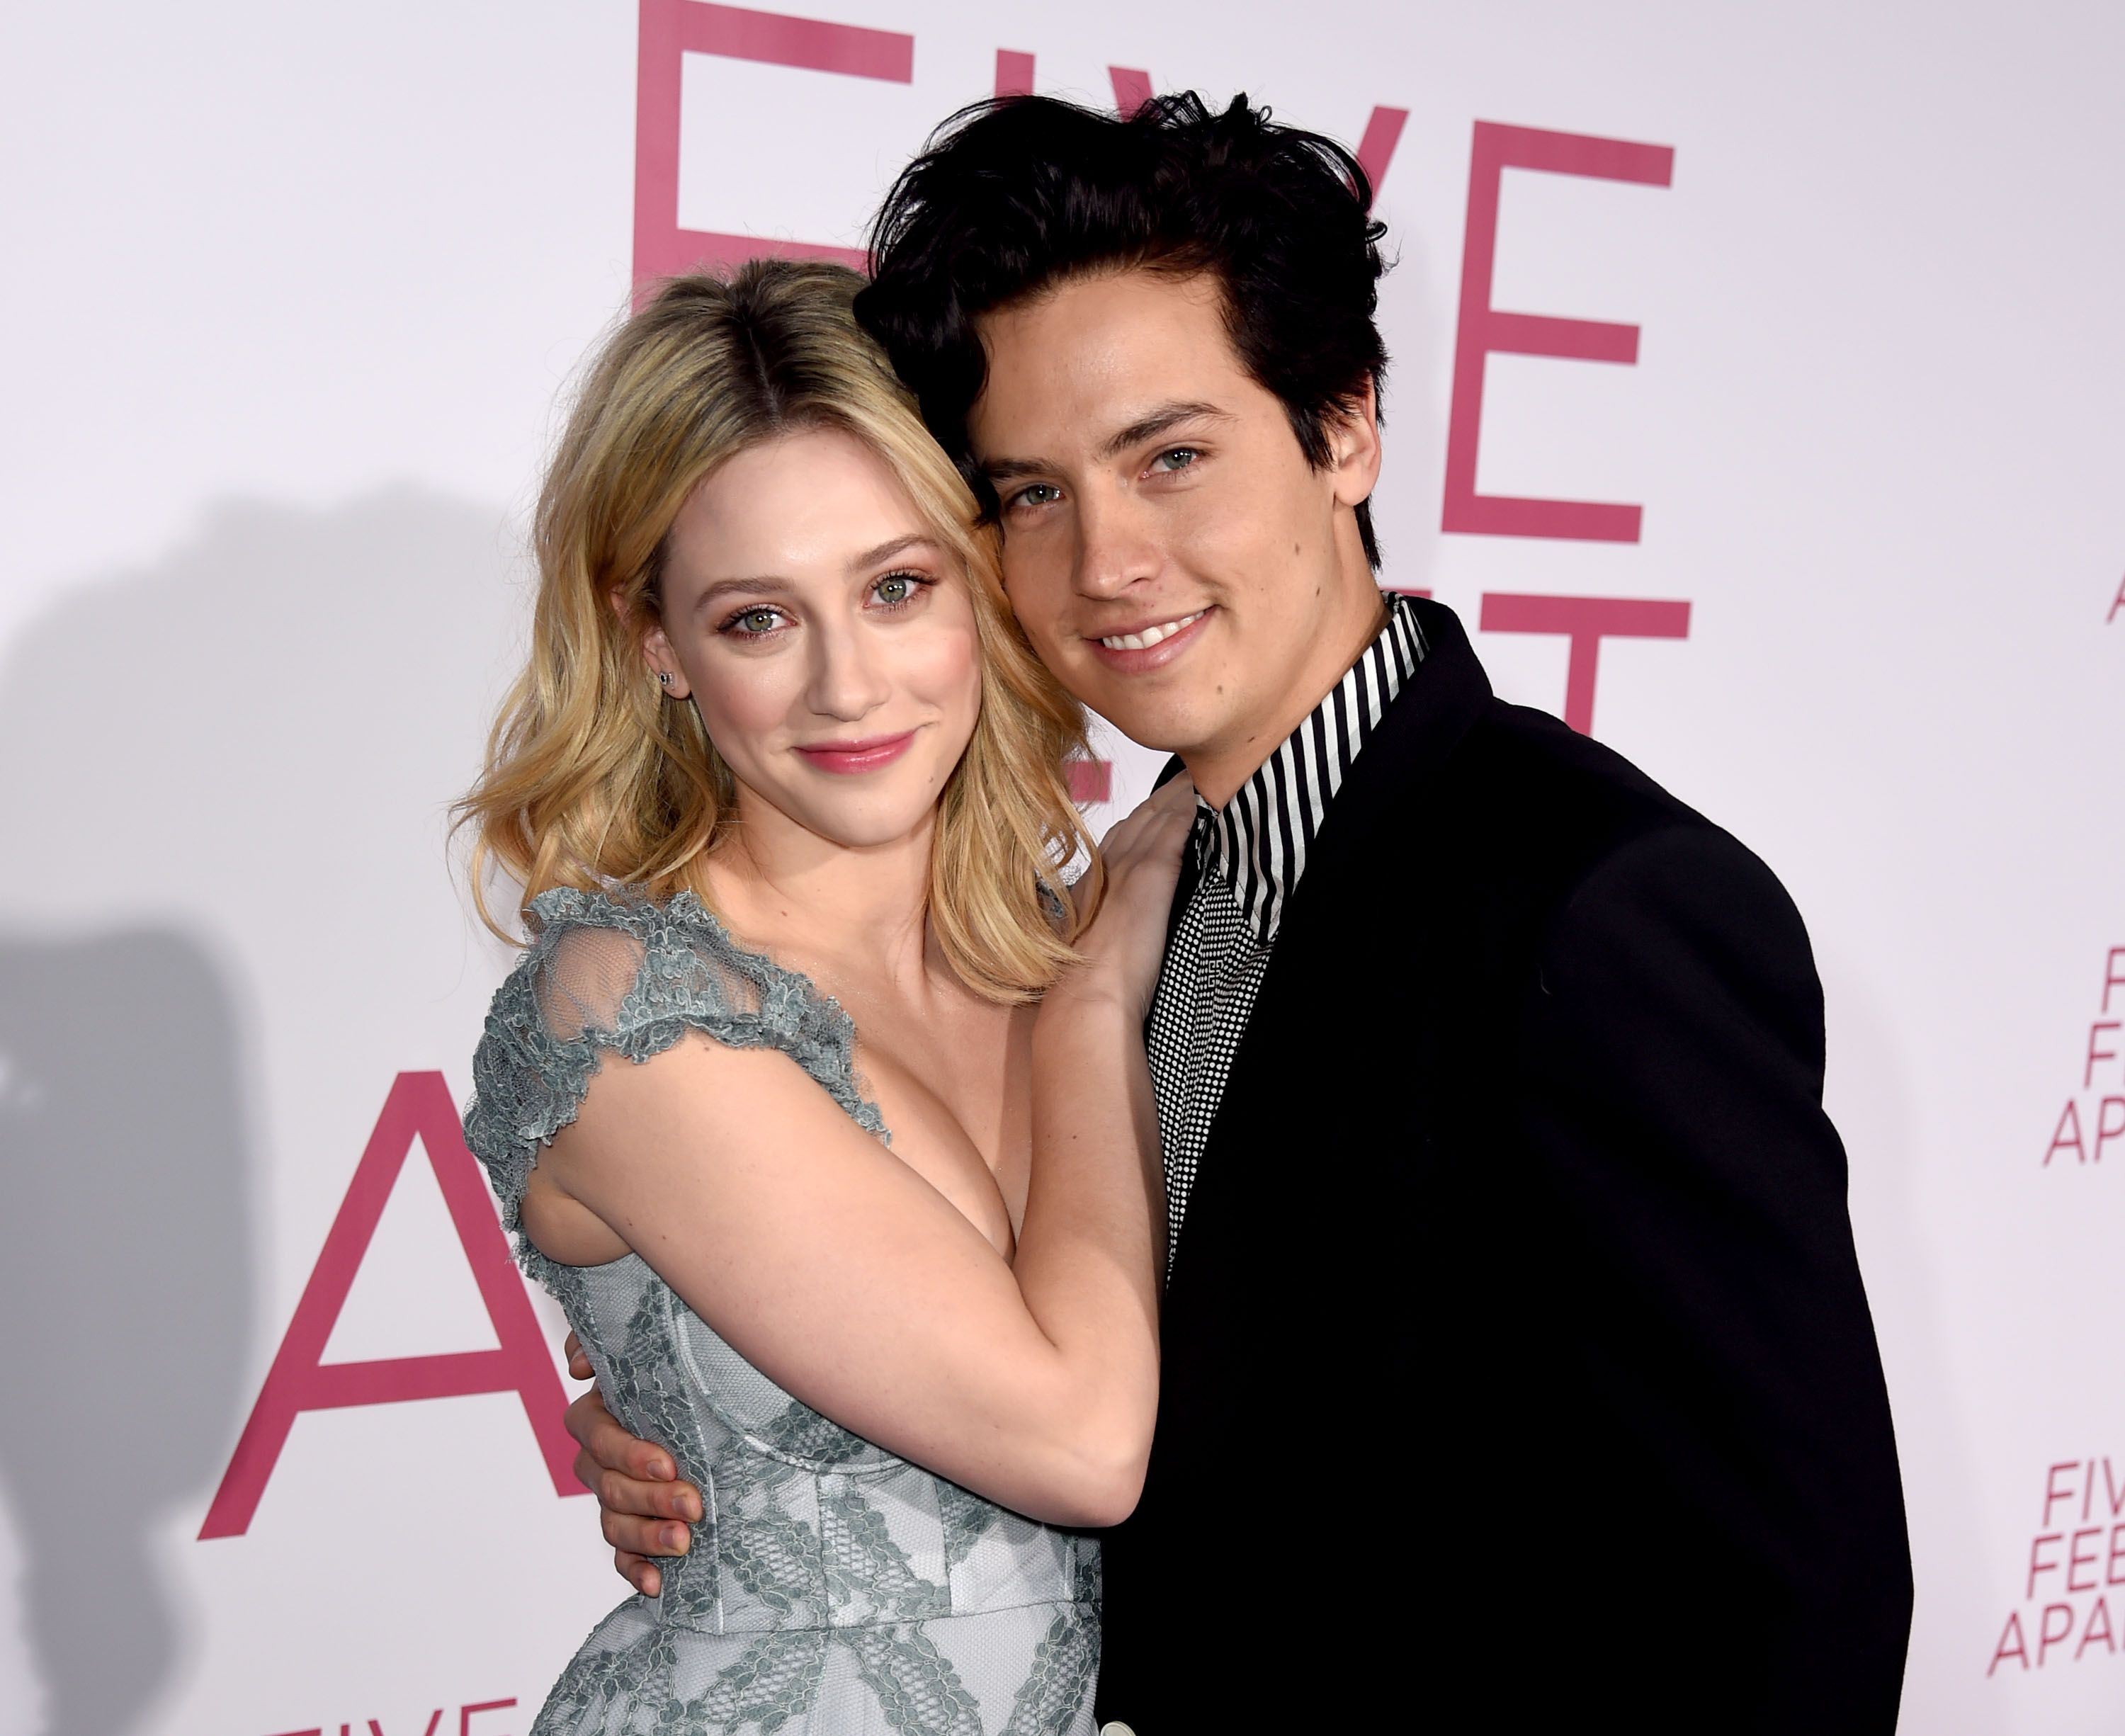 Riverdale actor reportedly confirmed Cole Sprouse and Lili Reinhart Break UP